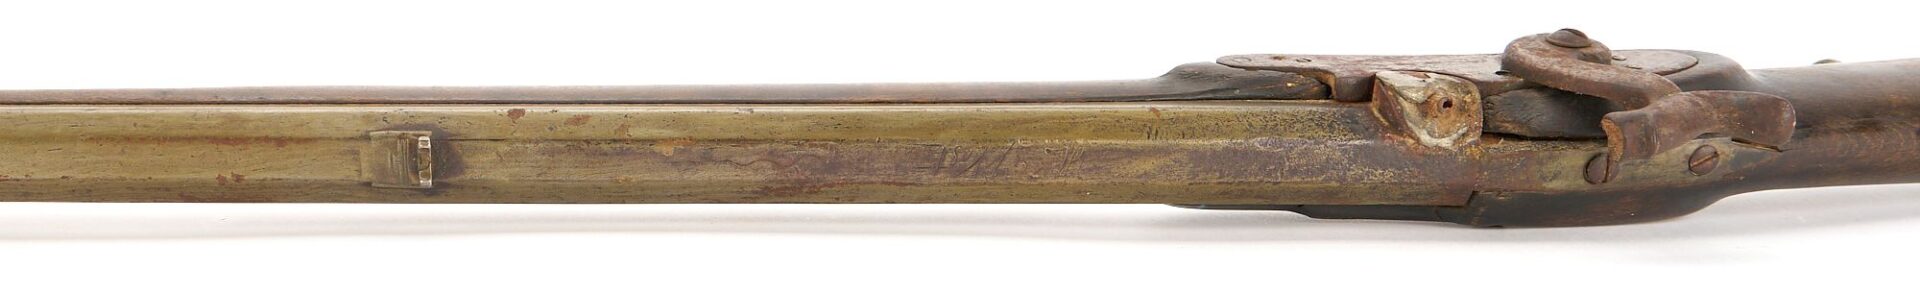 Lot 529: Kentucky Full Stock Percussion Long Rifle, H West